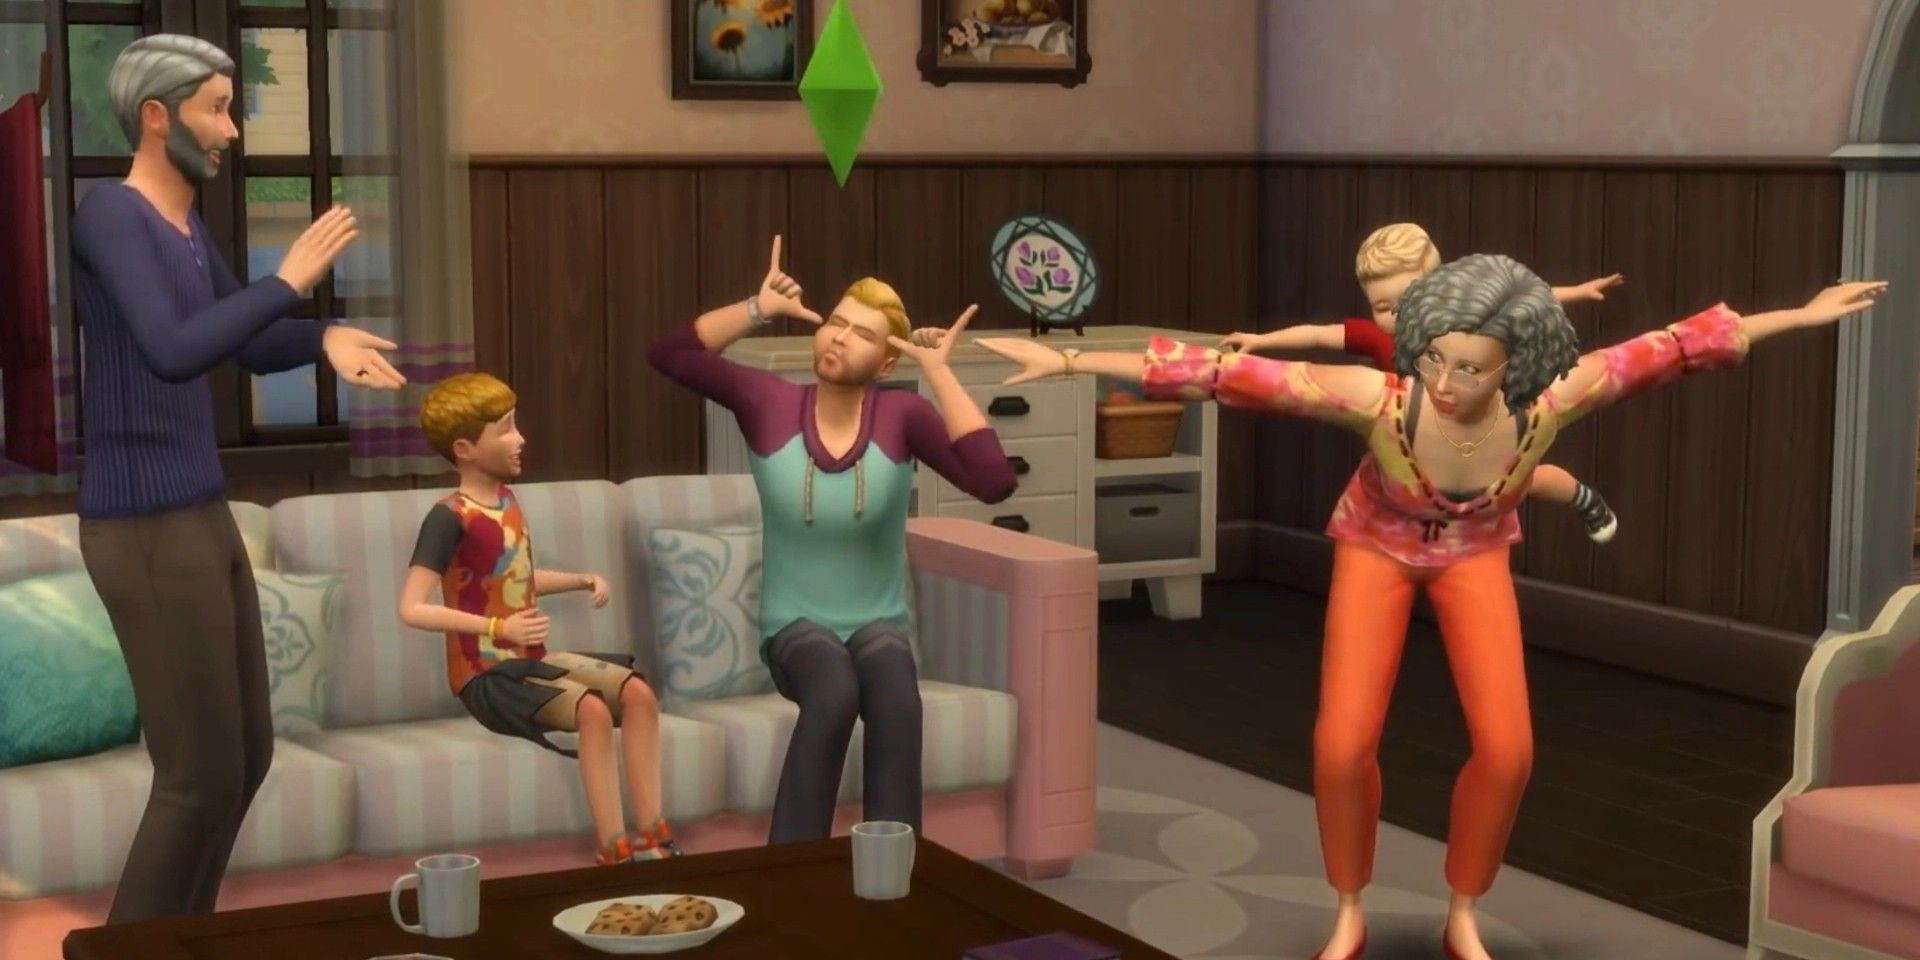 Sims 4 family playing around, from left to right an elder clapping, a child and adult on a couch with the adult making a funny face, and a toddler riding on an elder's back like it's an airplane.